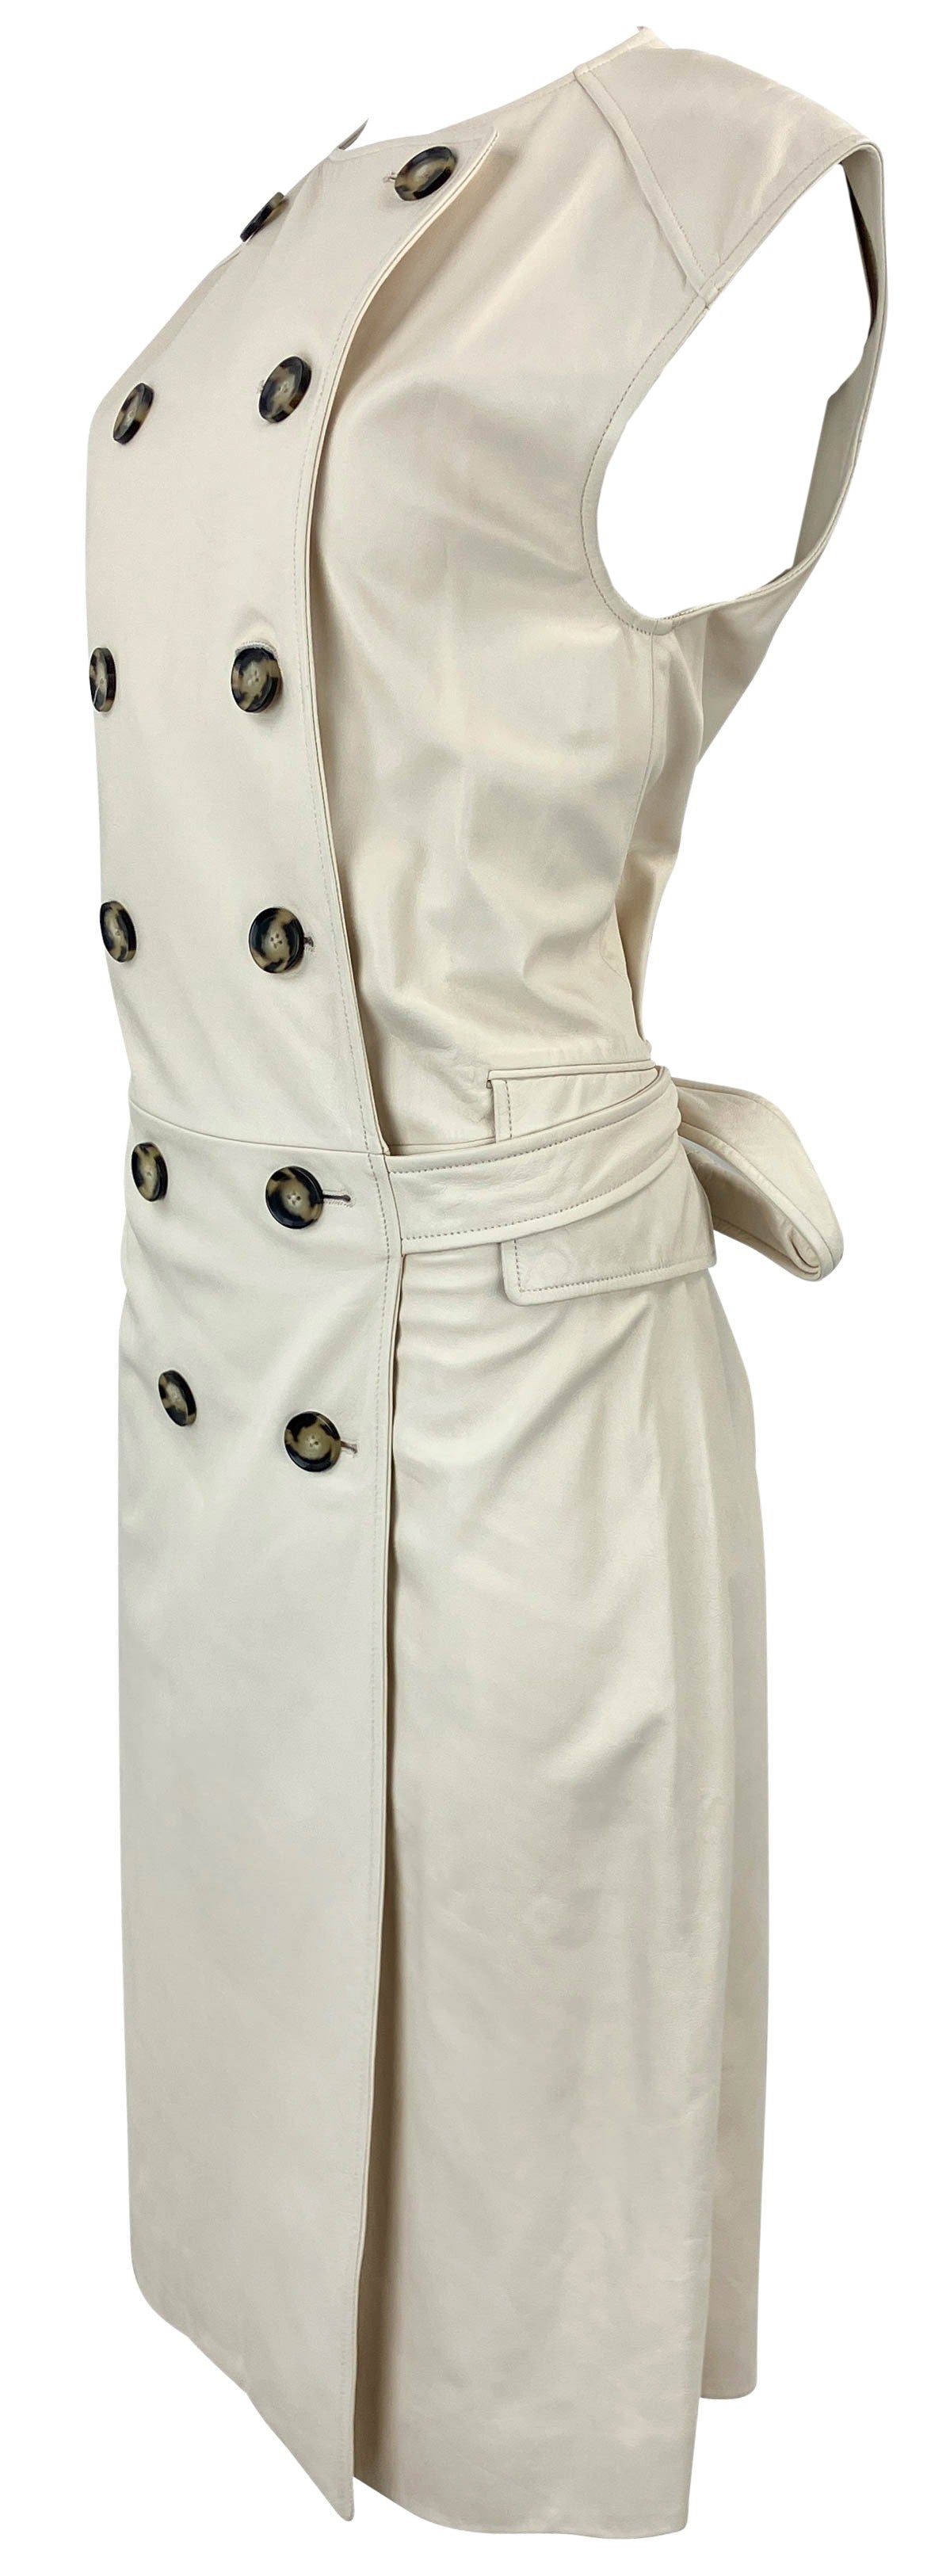 Proenza Schouler Leather Double Breasted Wrap Dress in Cream - Discounts on Proenza Schouler at UAL